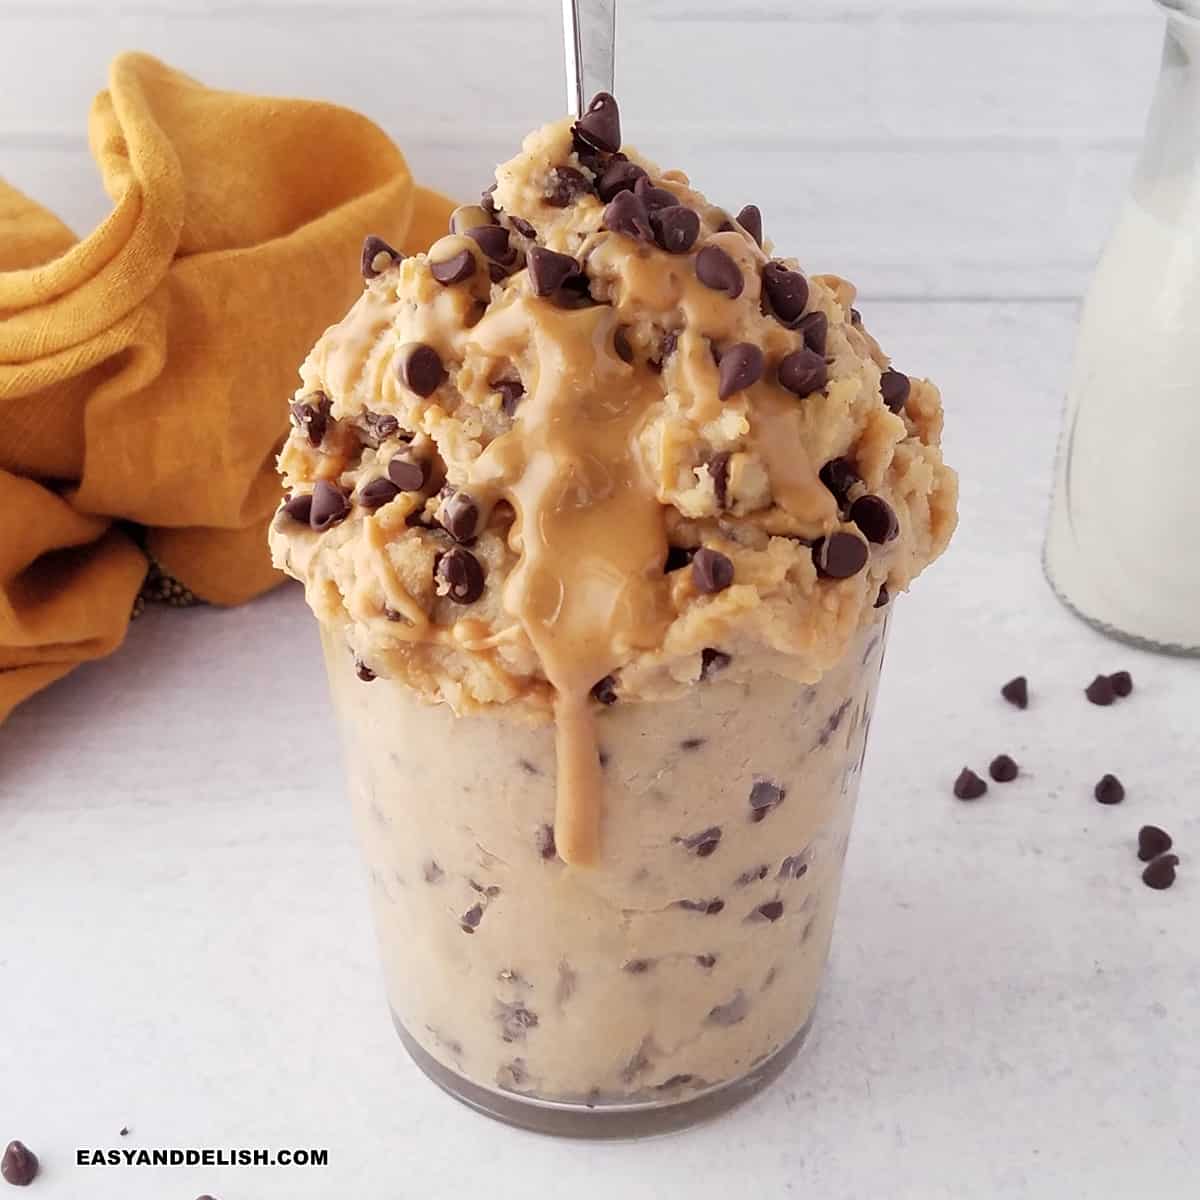 https://www.easyanddelish.com/wp-content/uploads/2023/06/protein-cookie-dough-featured-image.jpg